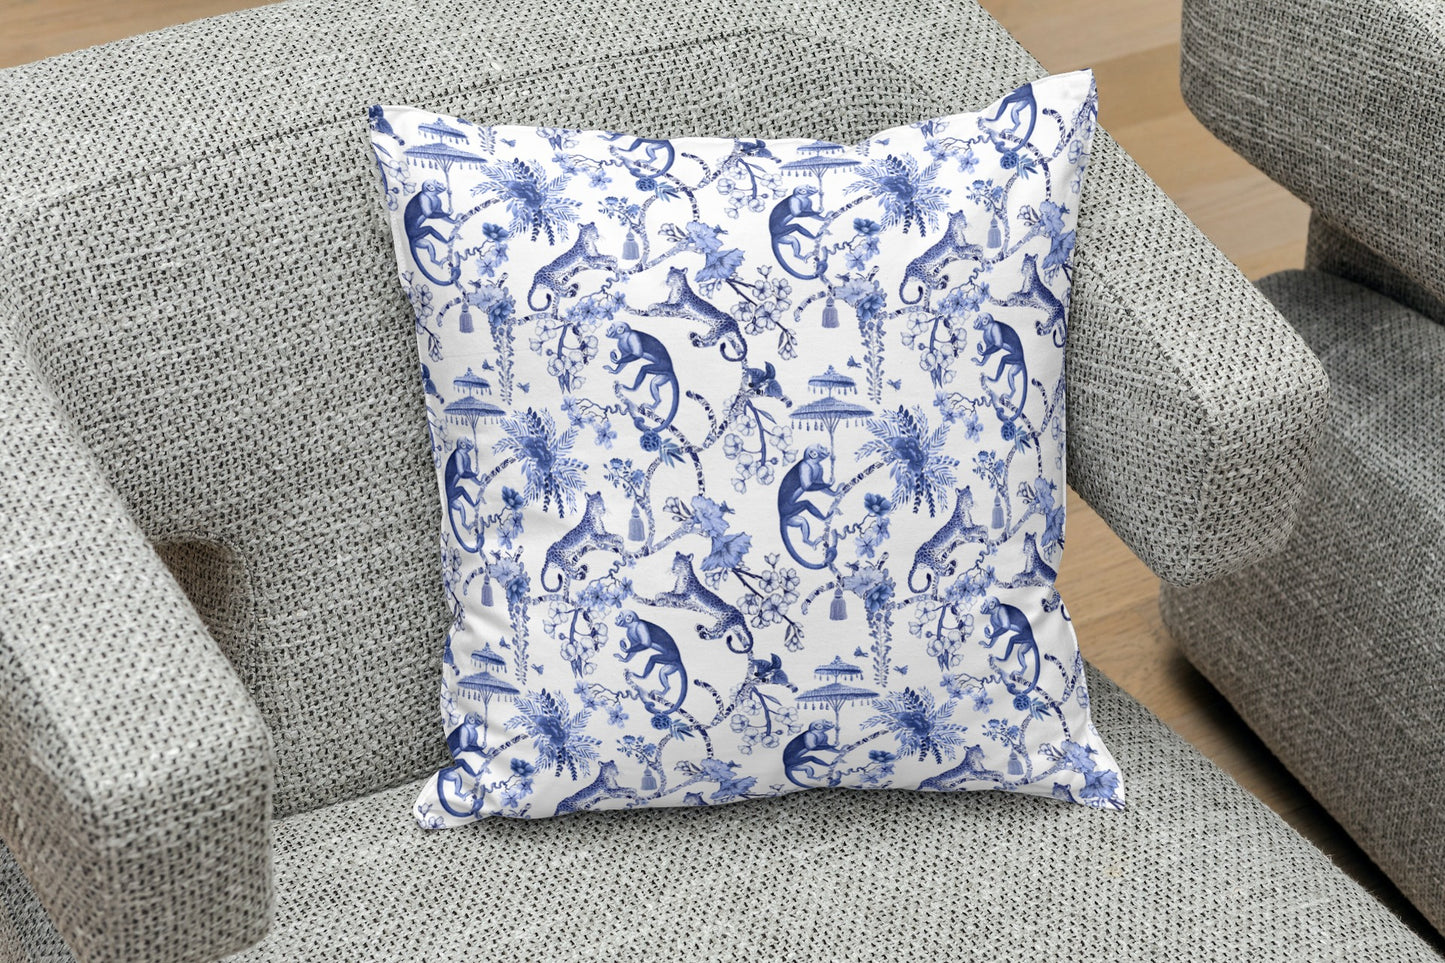 Monkey Jungle Outdoor Pillows Chinoiserie Blue Toile